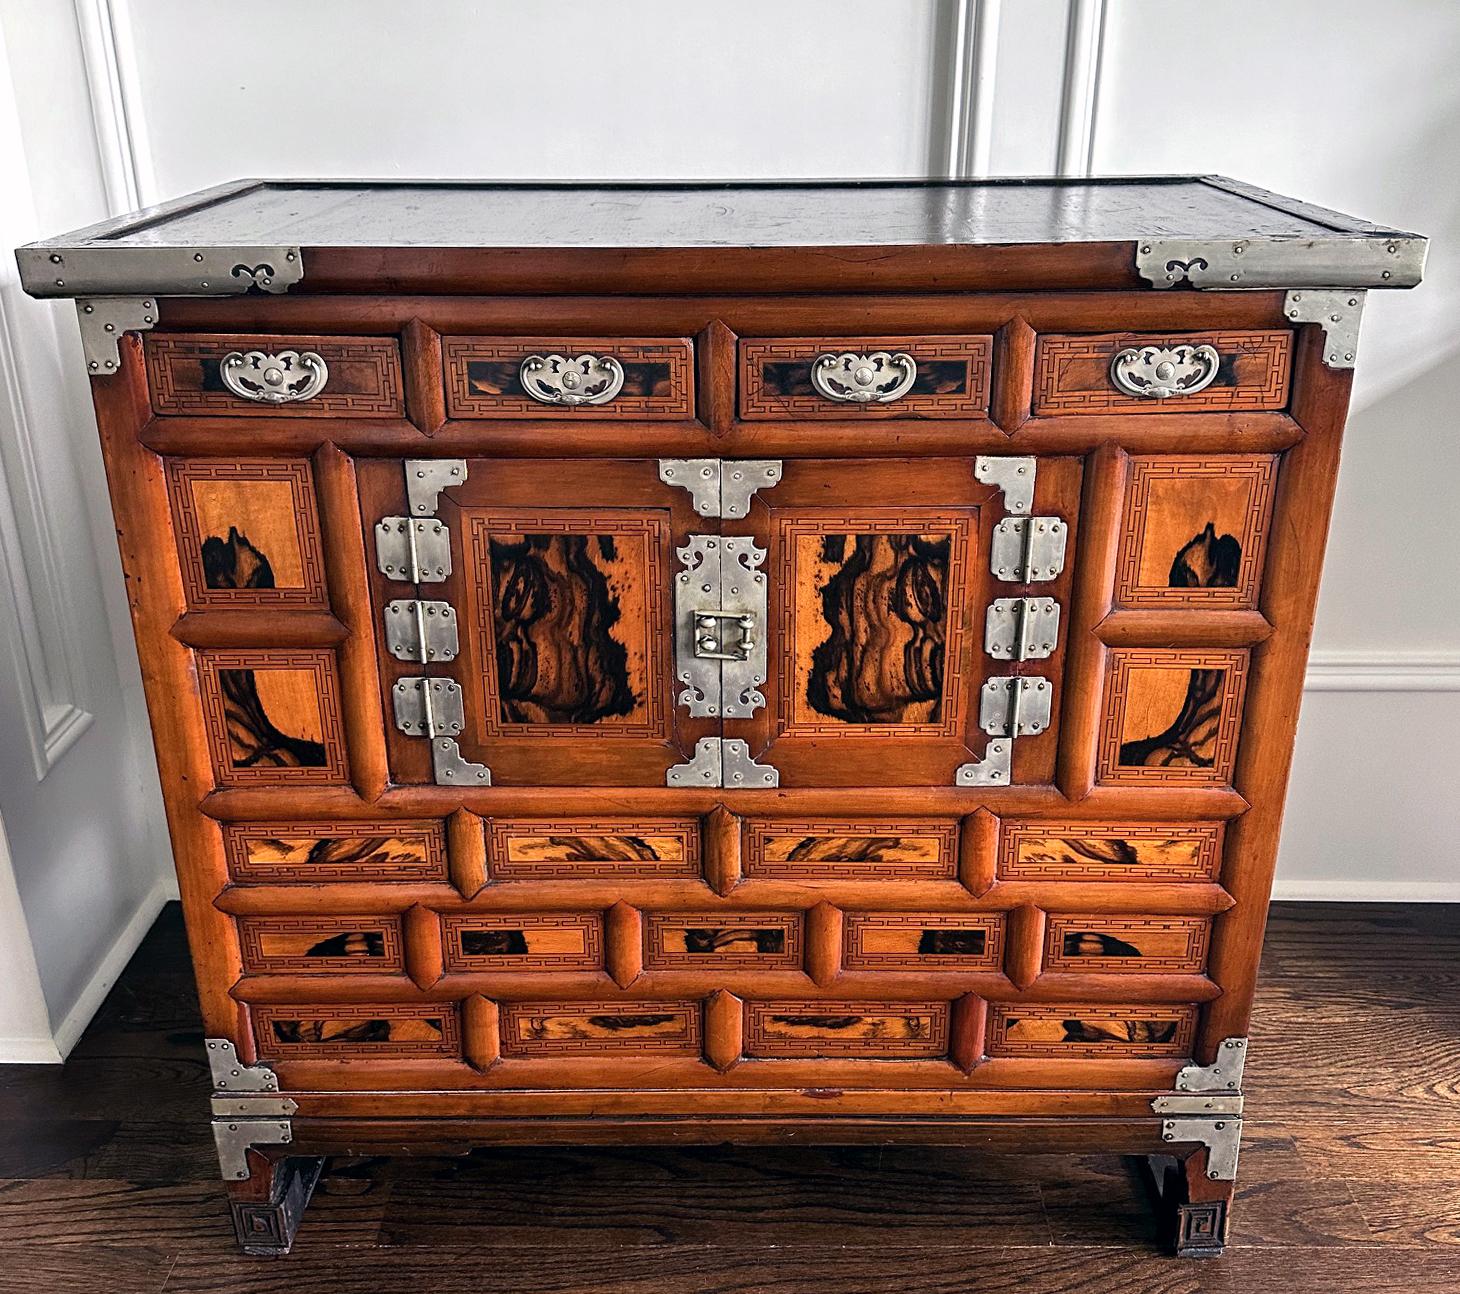 A finely crafted Korean Morijang chest dated to the late 19th century toward the end of Joseon Dynasty. 